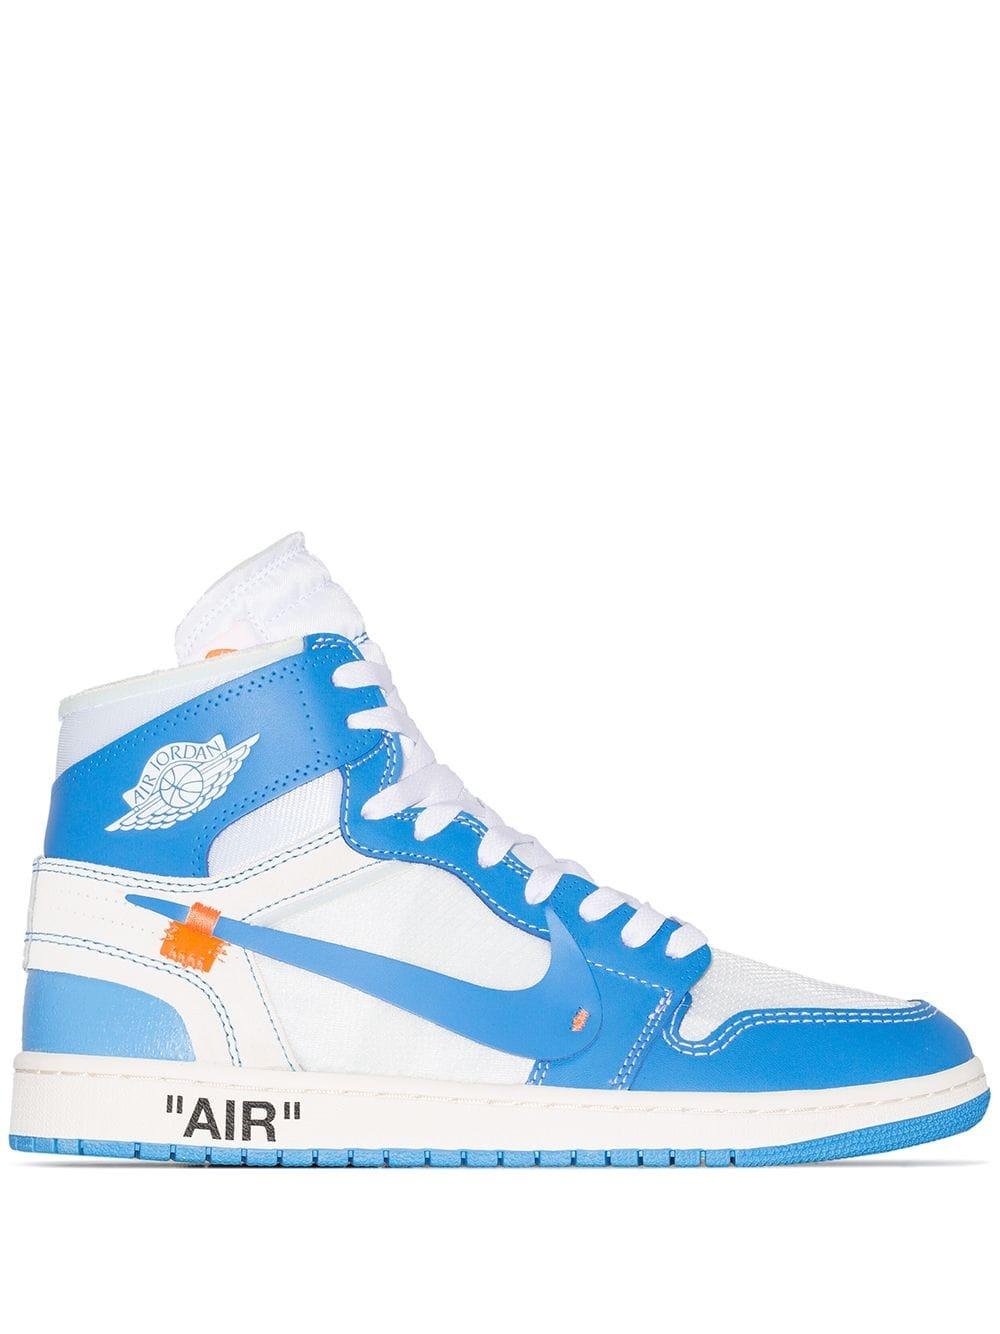 Nike X Off-white Air 1 Retro Sneakers for Men - Lyst